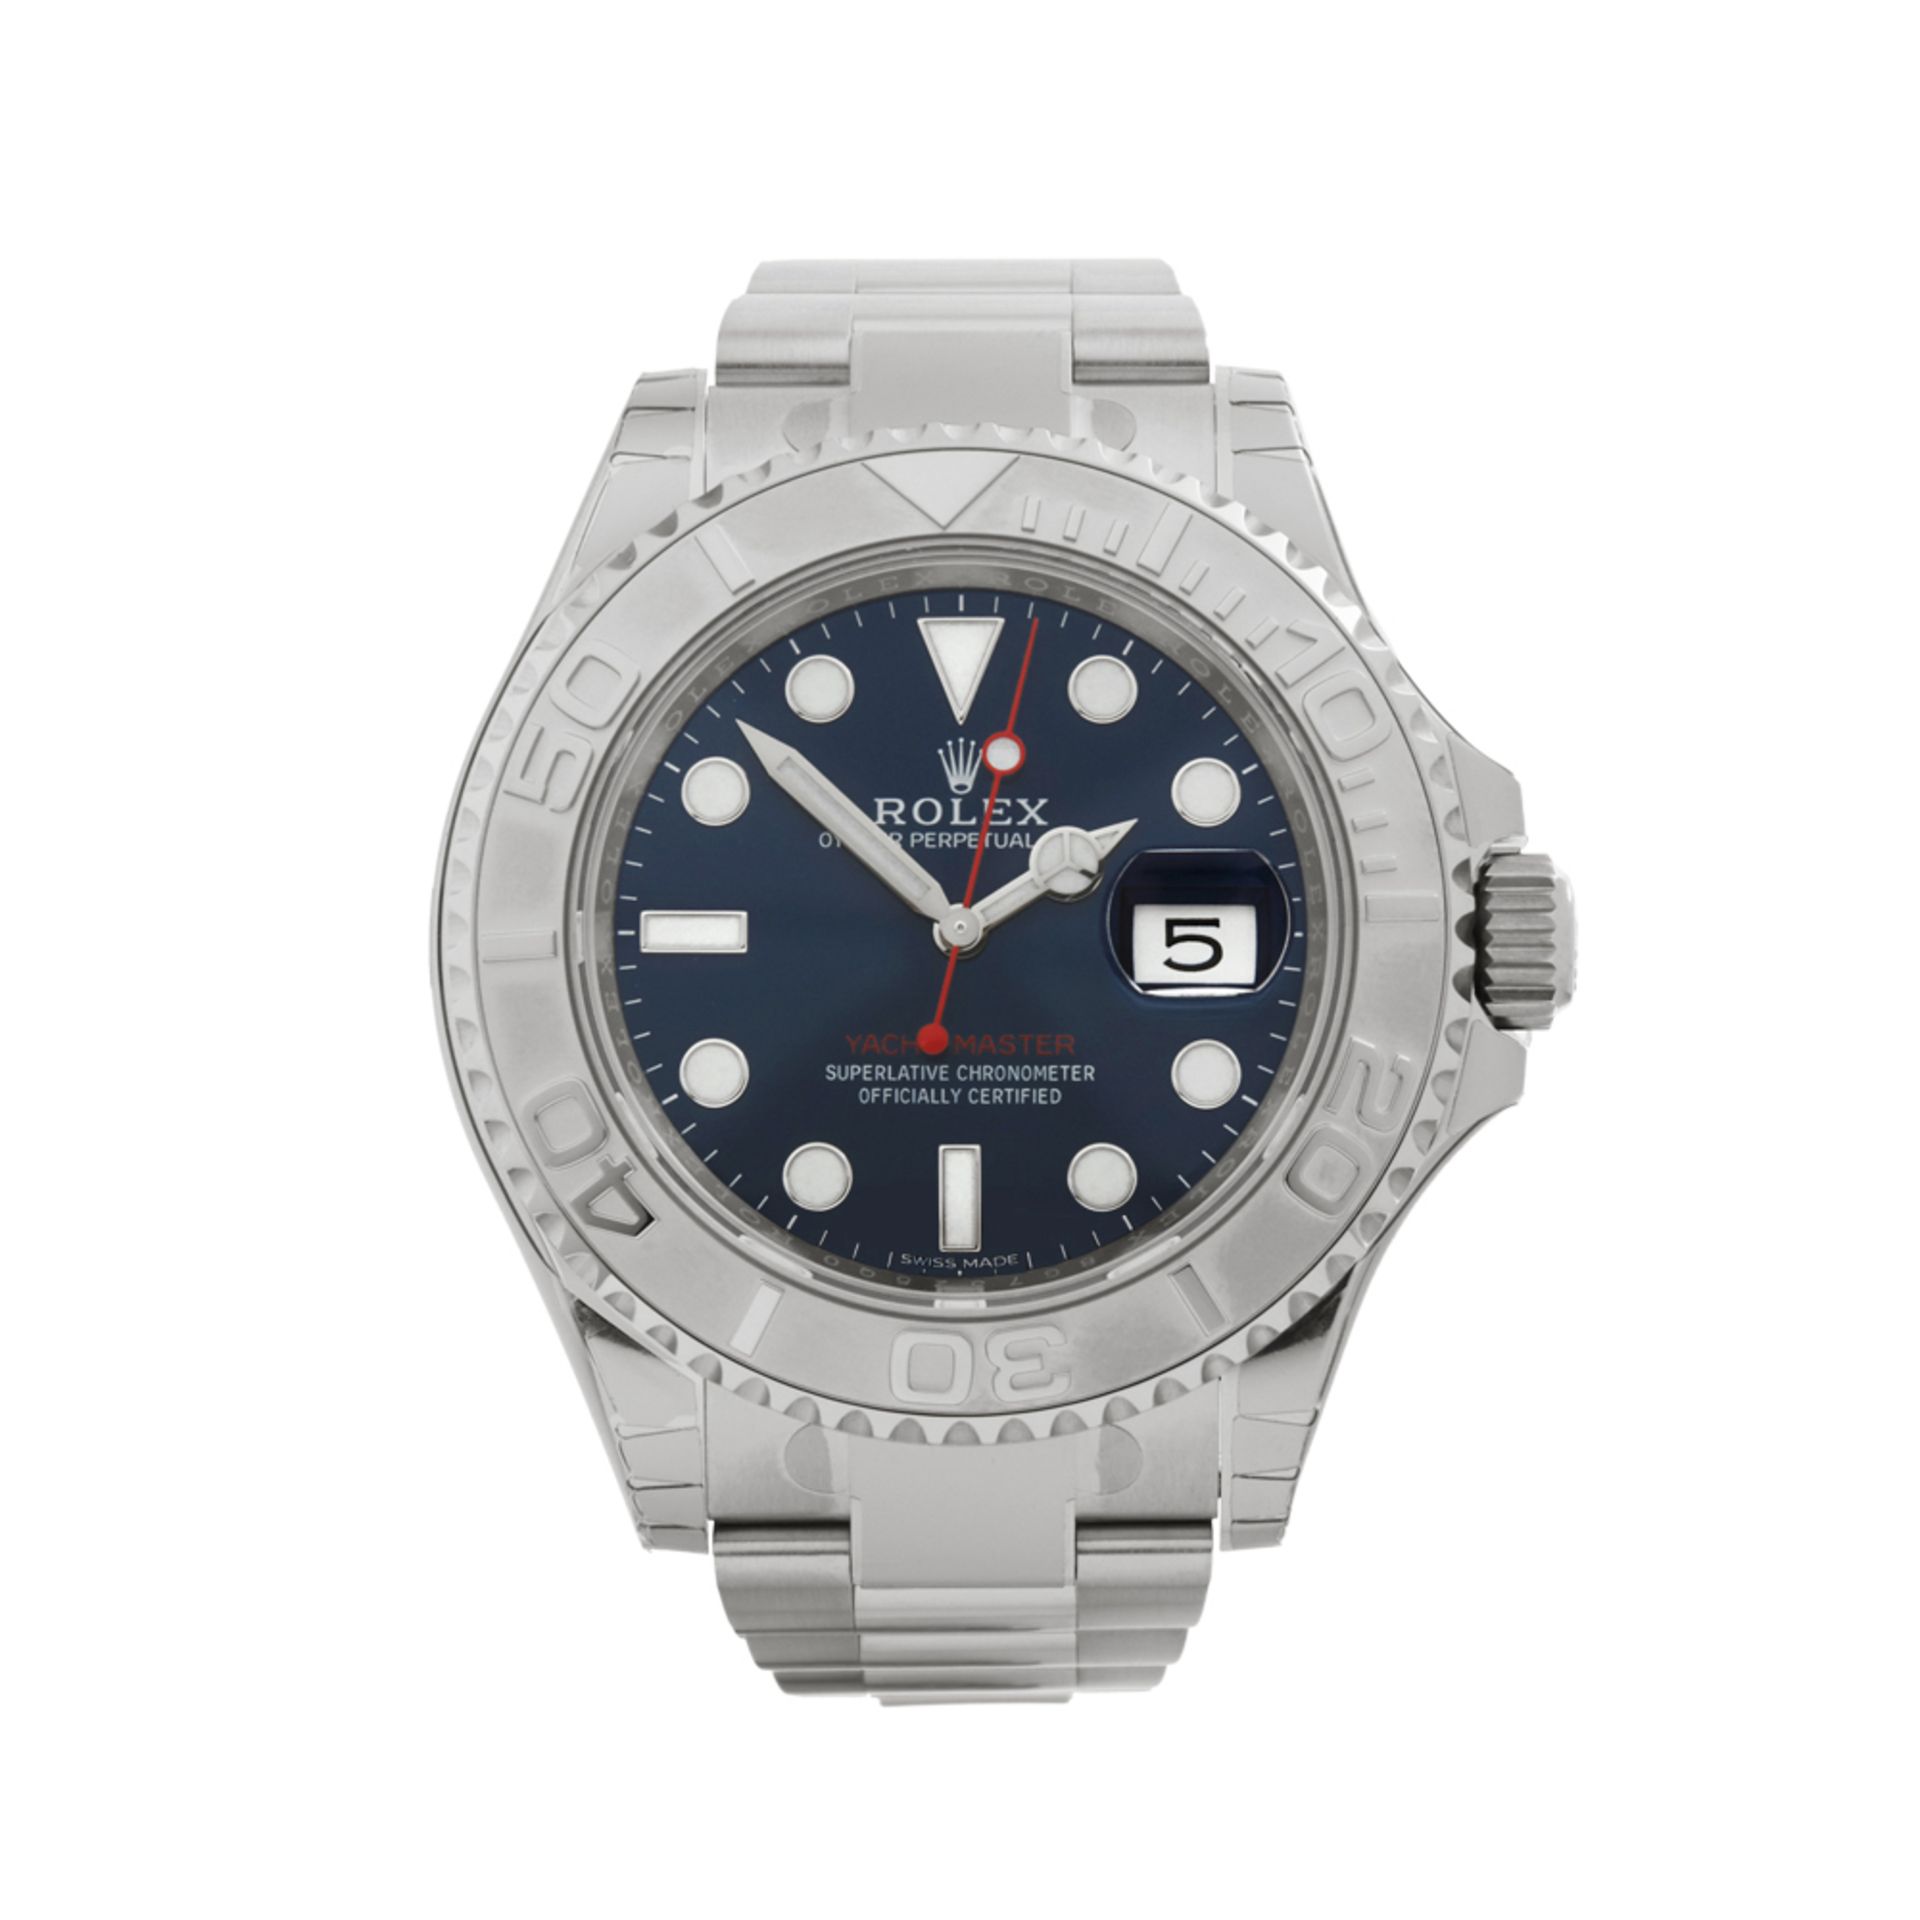 Rolex Yacht-Master Stainless Steel - 116622 - Image 2 of 7